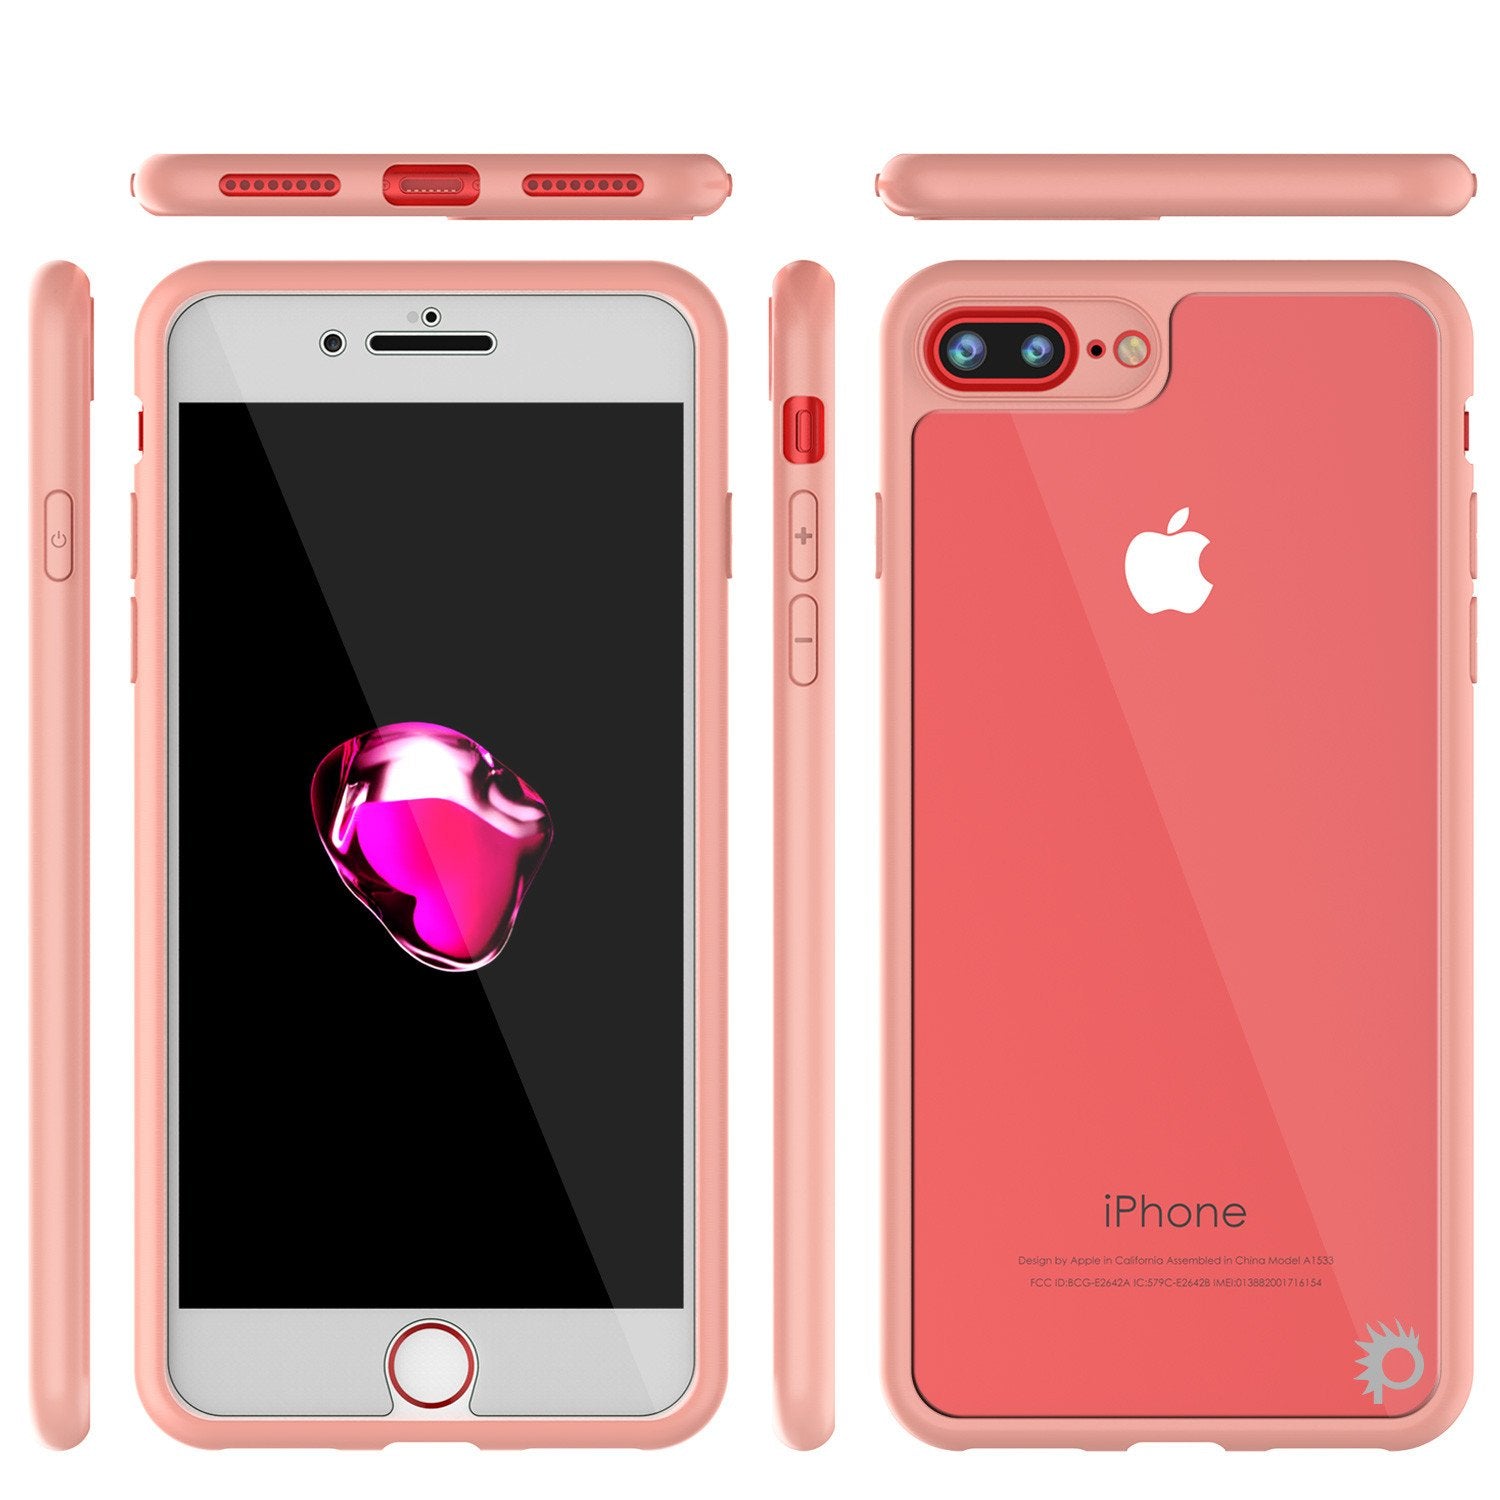 iPhone 7+ Plus Case [MASK Series] [PINK] Full Body Hybrid Dual Layer TPU Cover W/ protective Tempered Glass Screen Protector